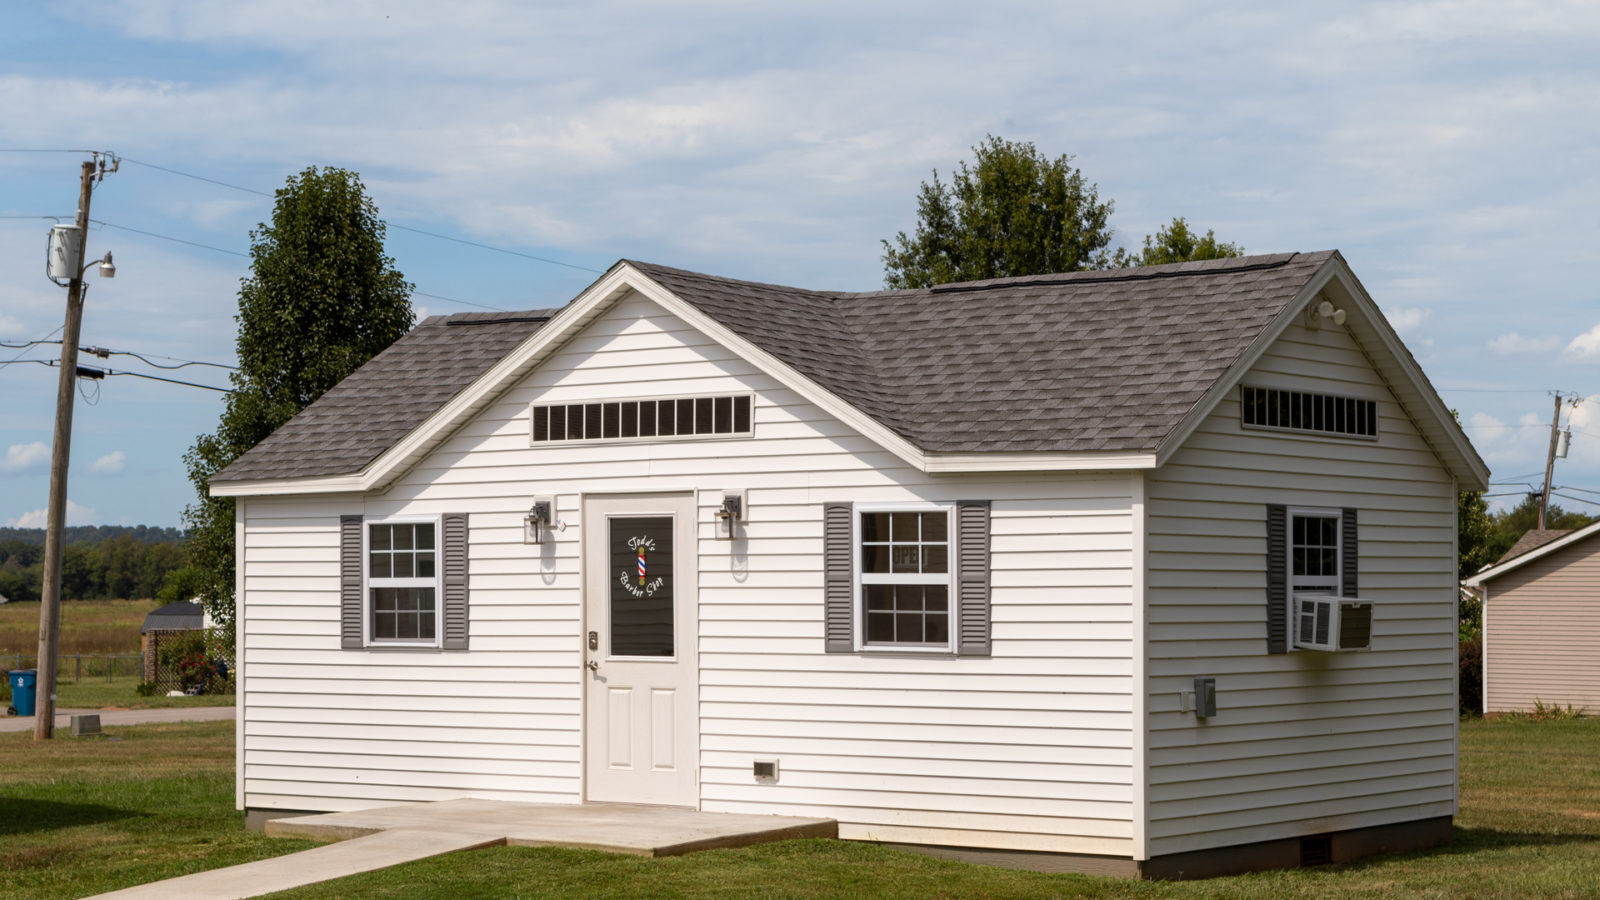 exterior of white barbershop backyard shed for sale in KY and TN